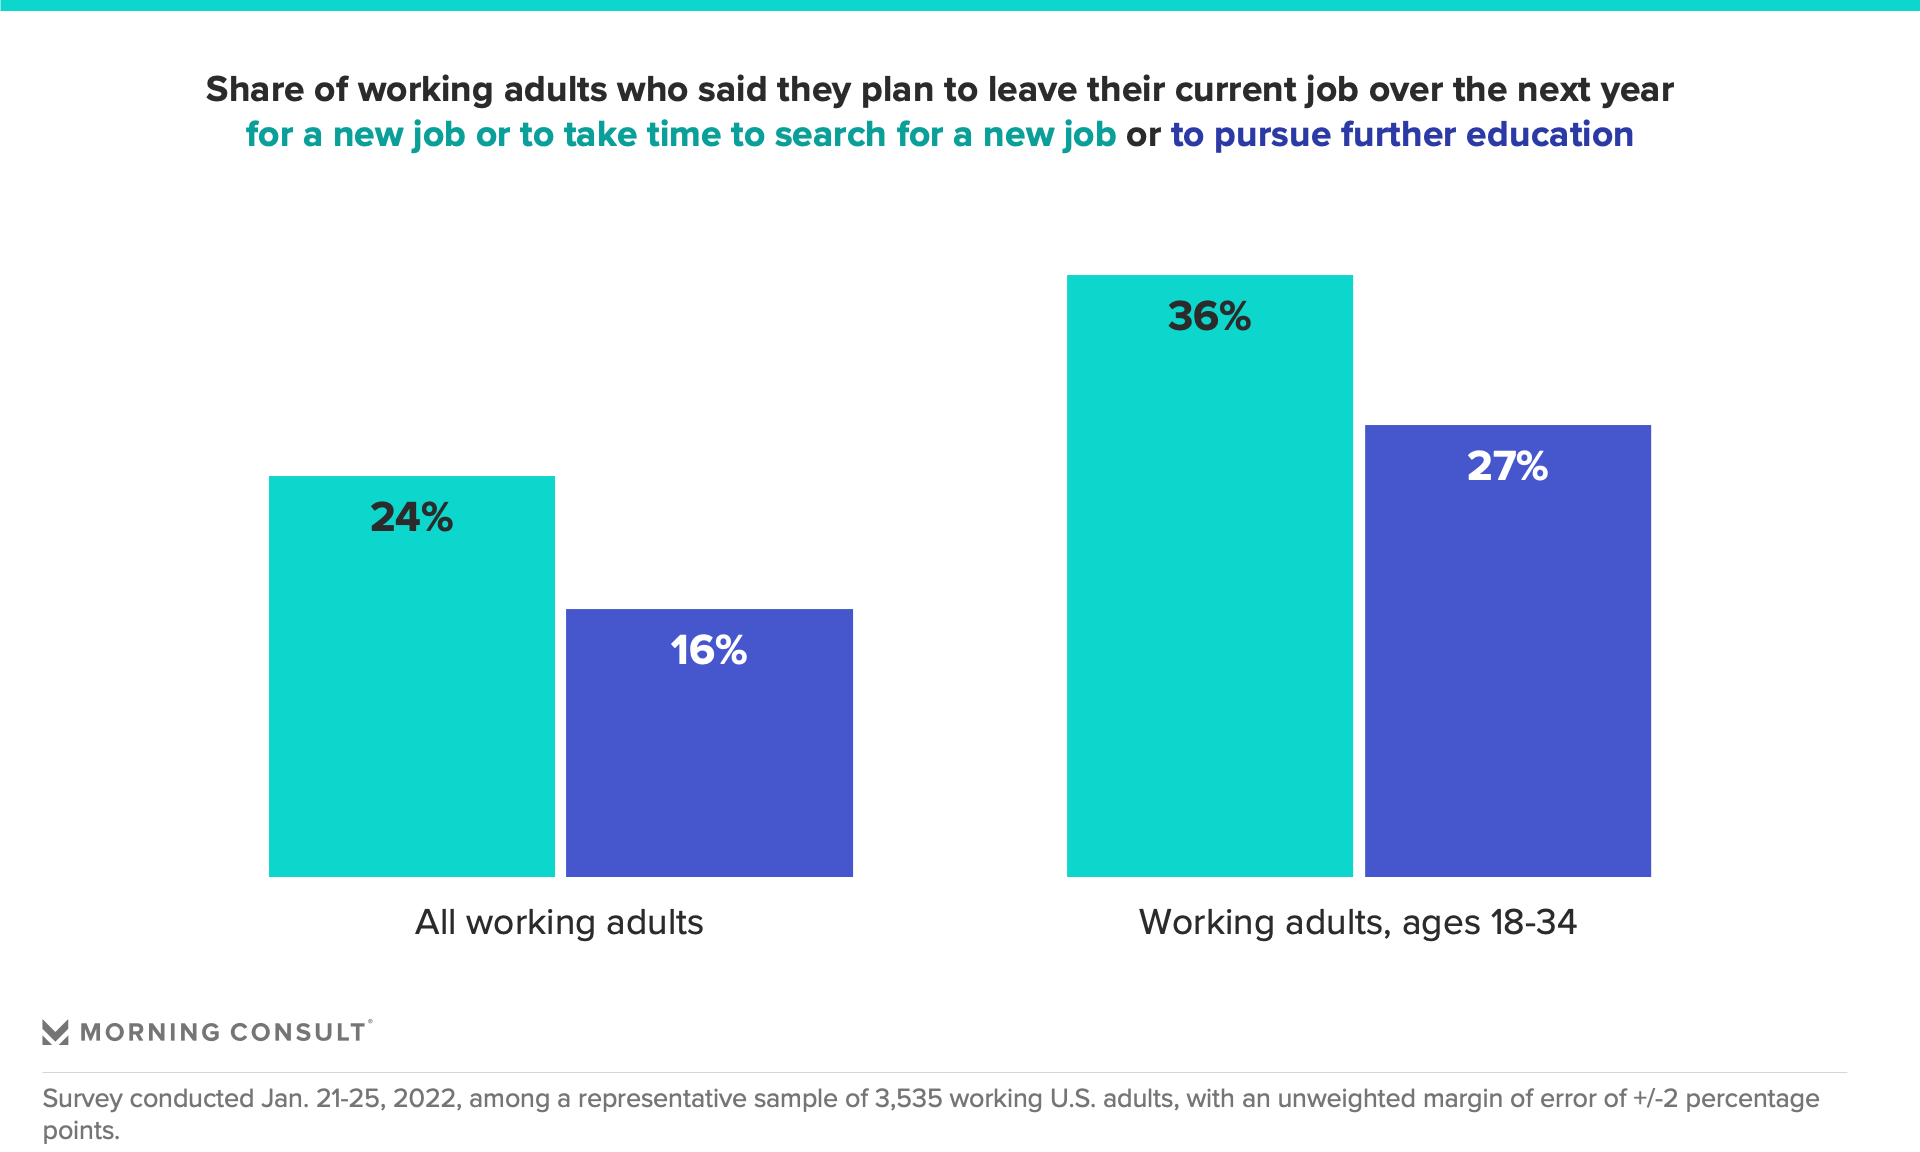 Chart depicting share of working adults planning to leave their current job over the next year, by age